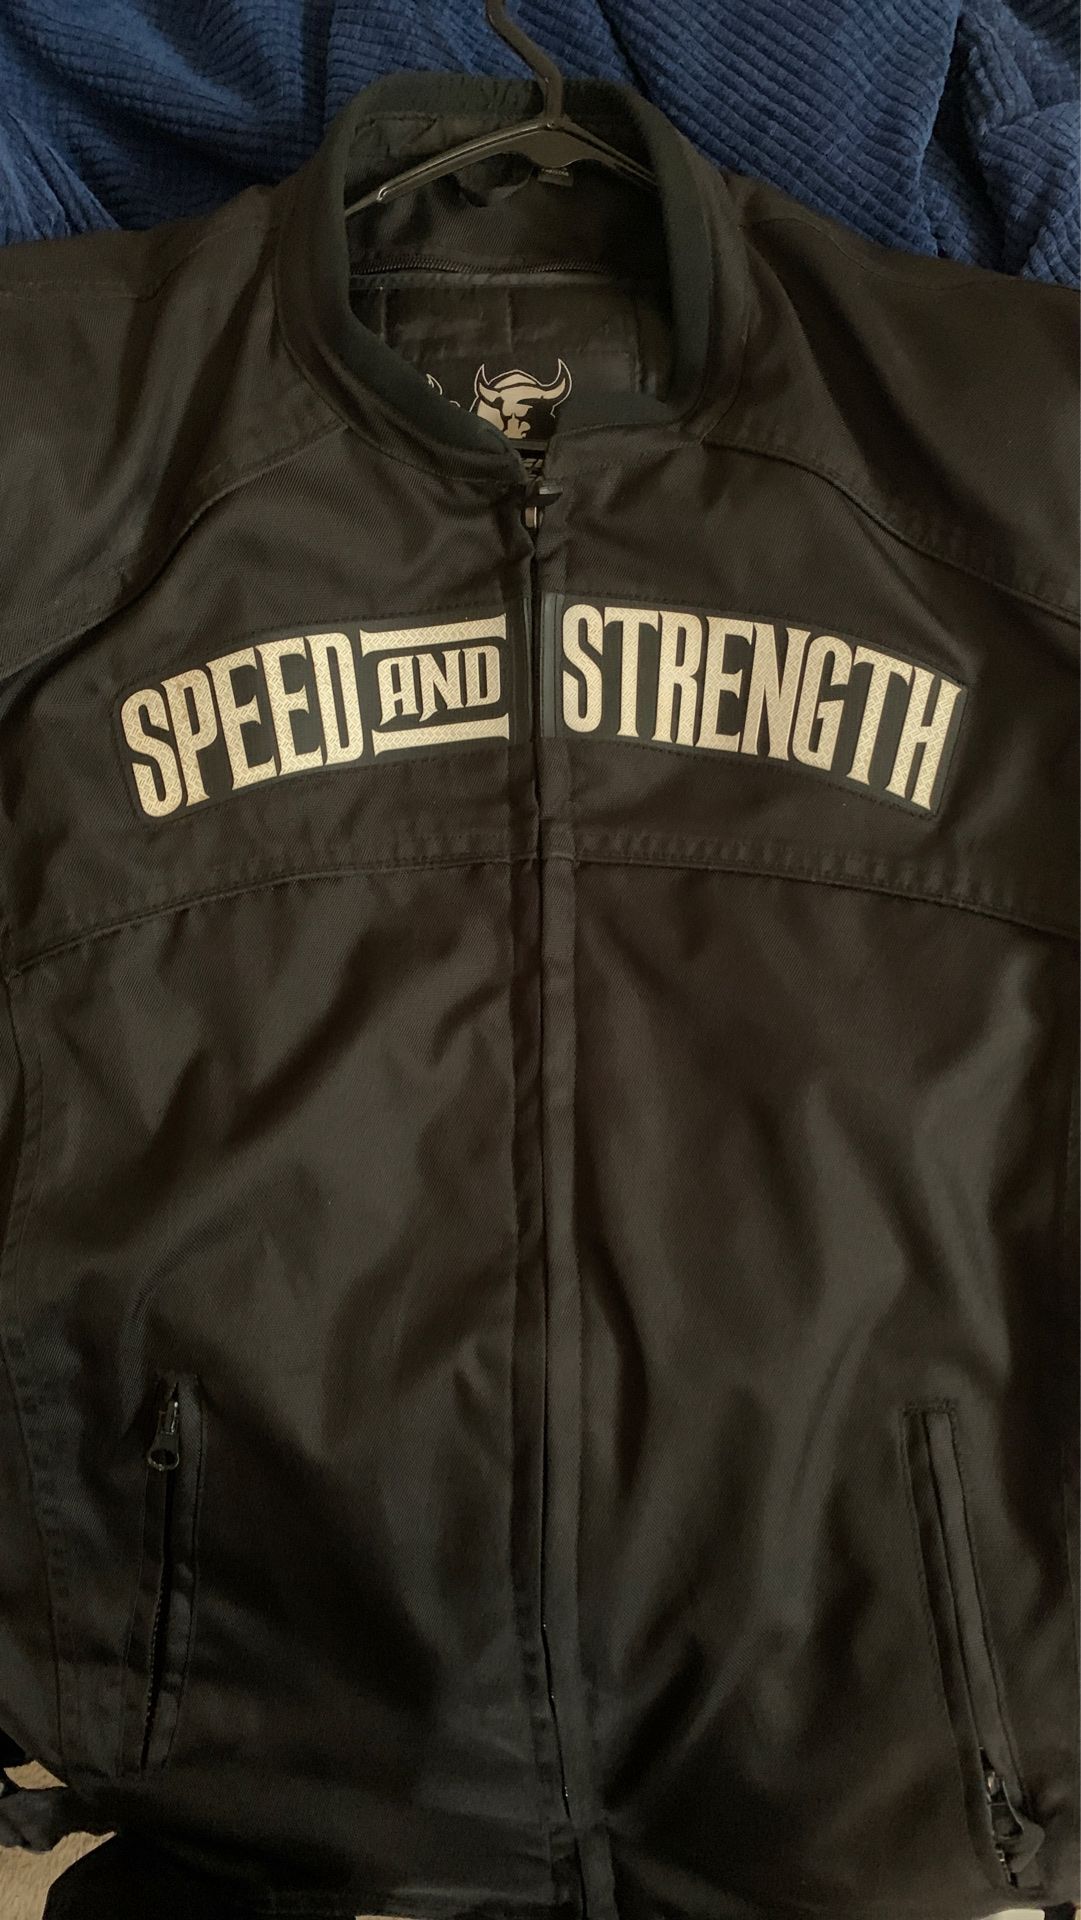 Speed and strength XL motorcycle jacket